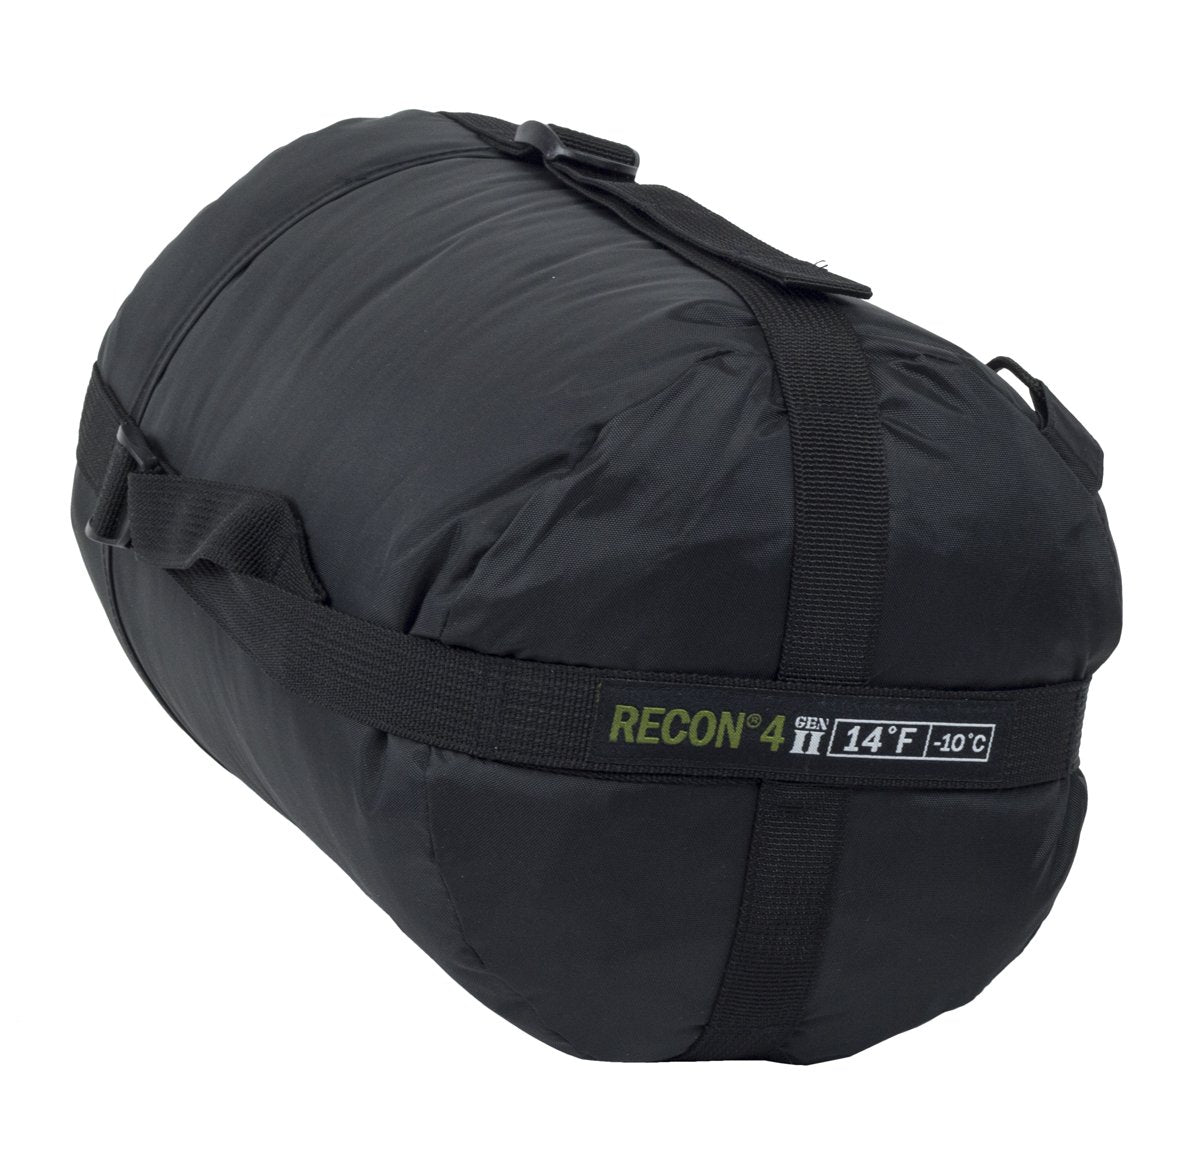 Recon 4 Sleeping Bag | Rated to 14 Degrees F